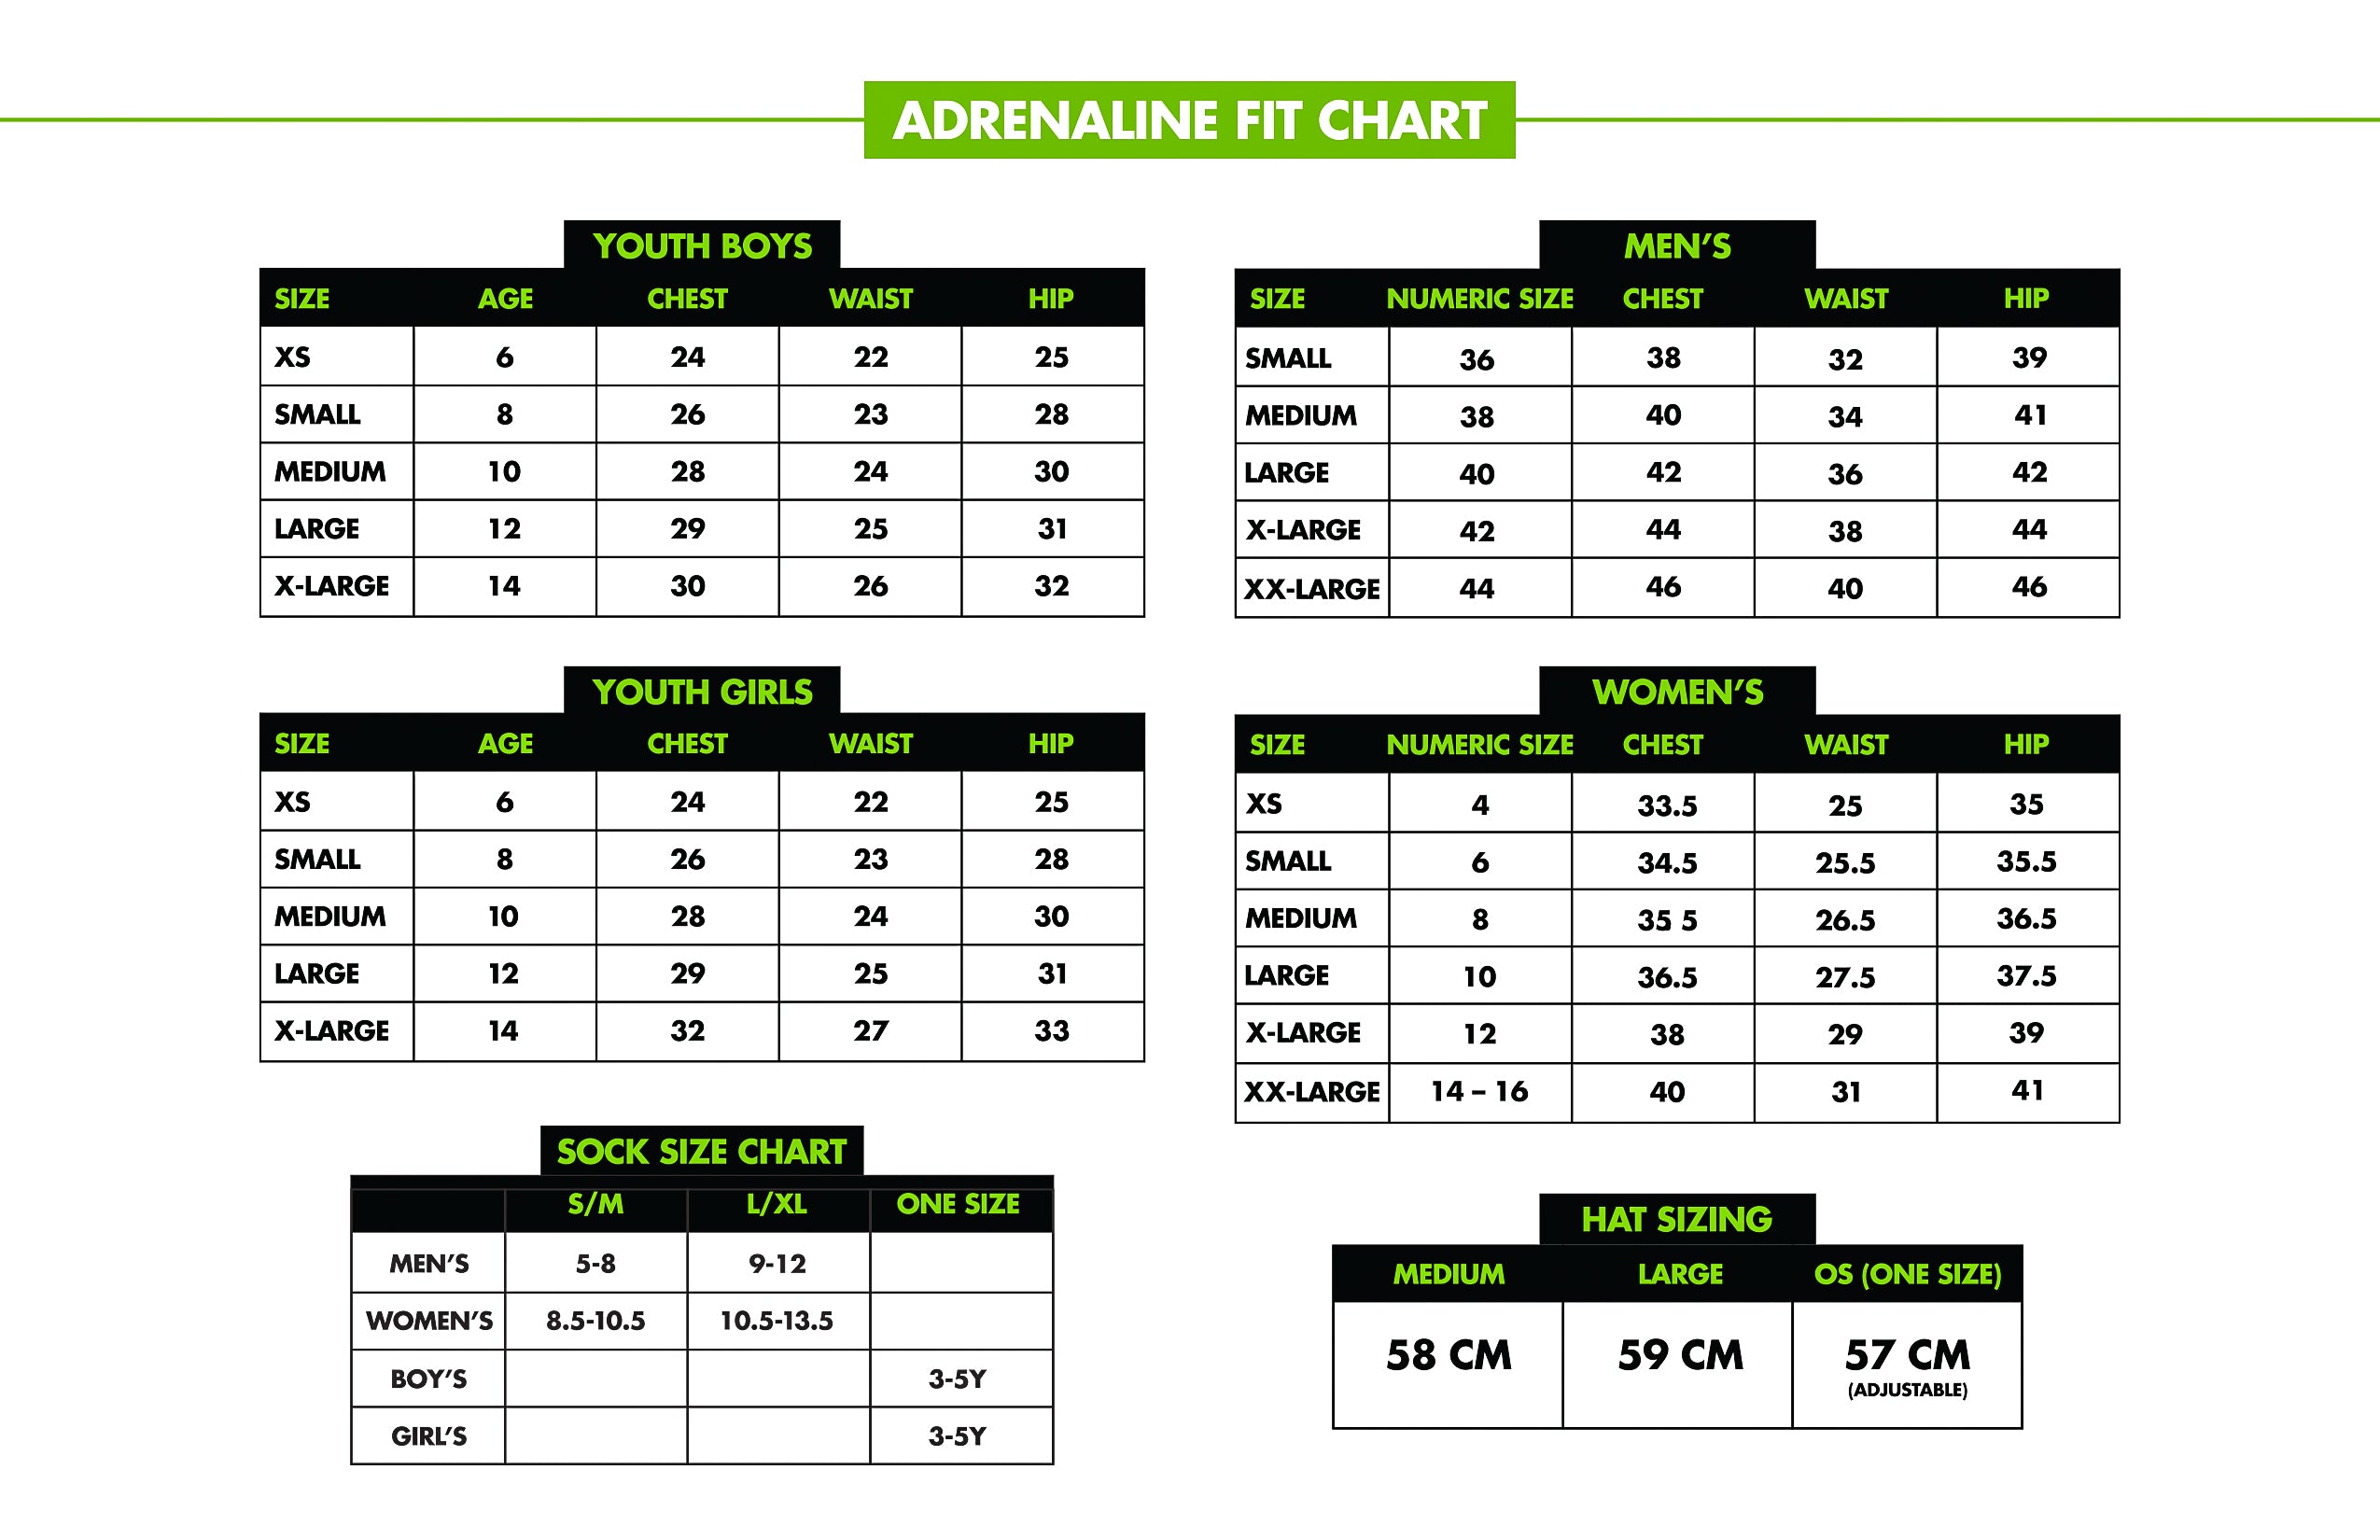 Adrenaline Lacrosse Apparel and Sock Size Fit Chart